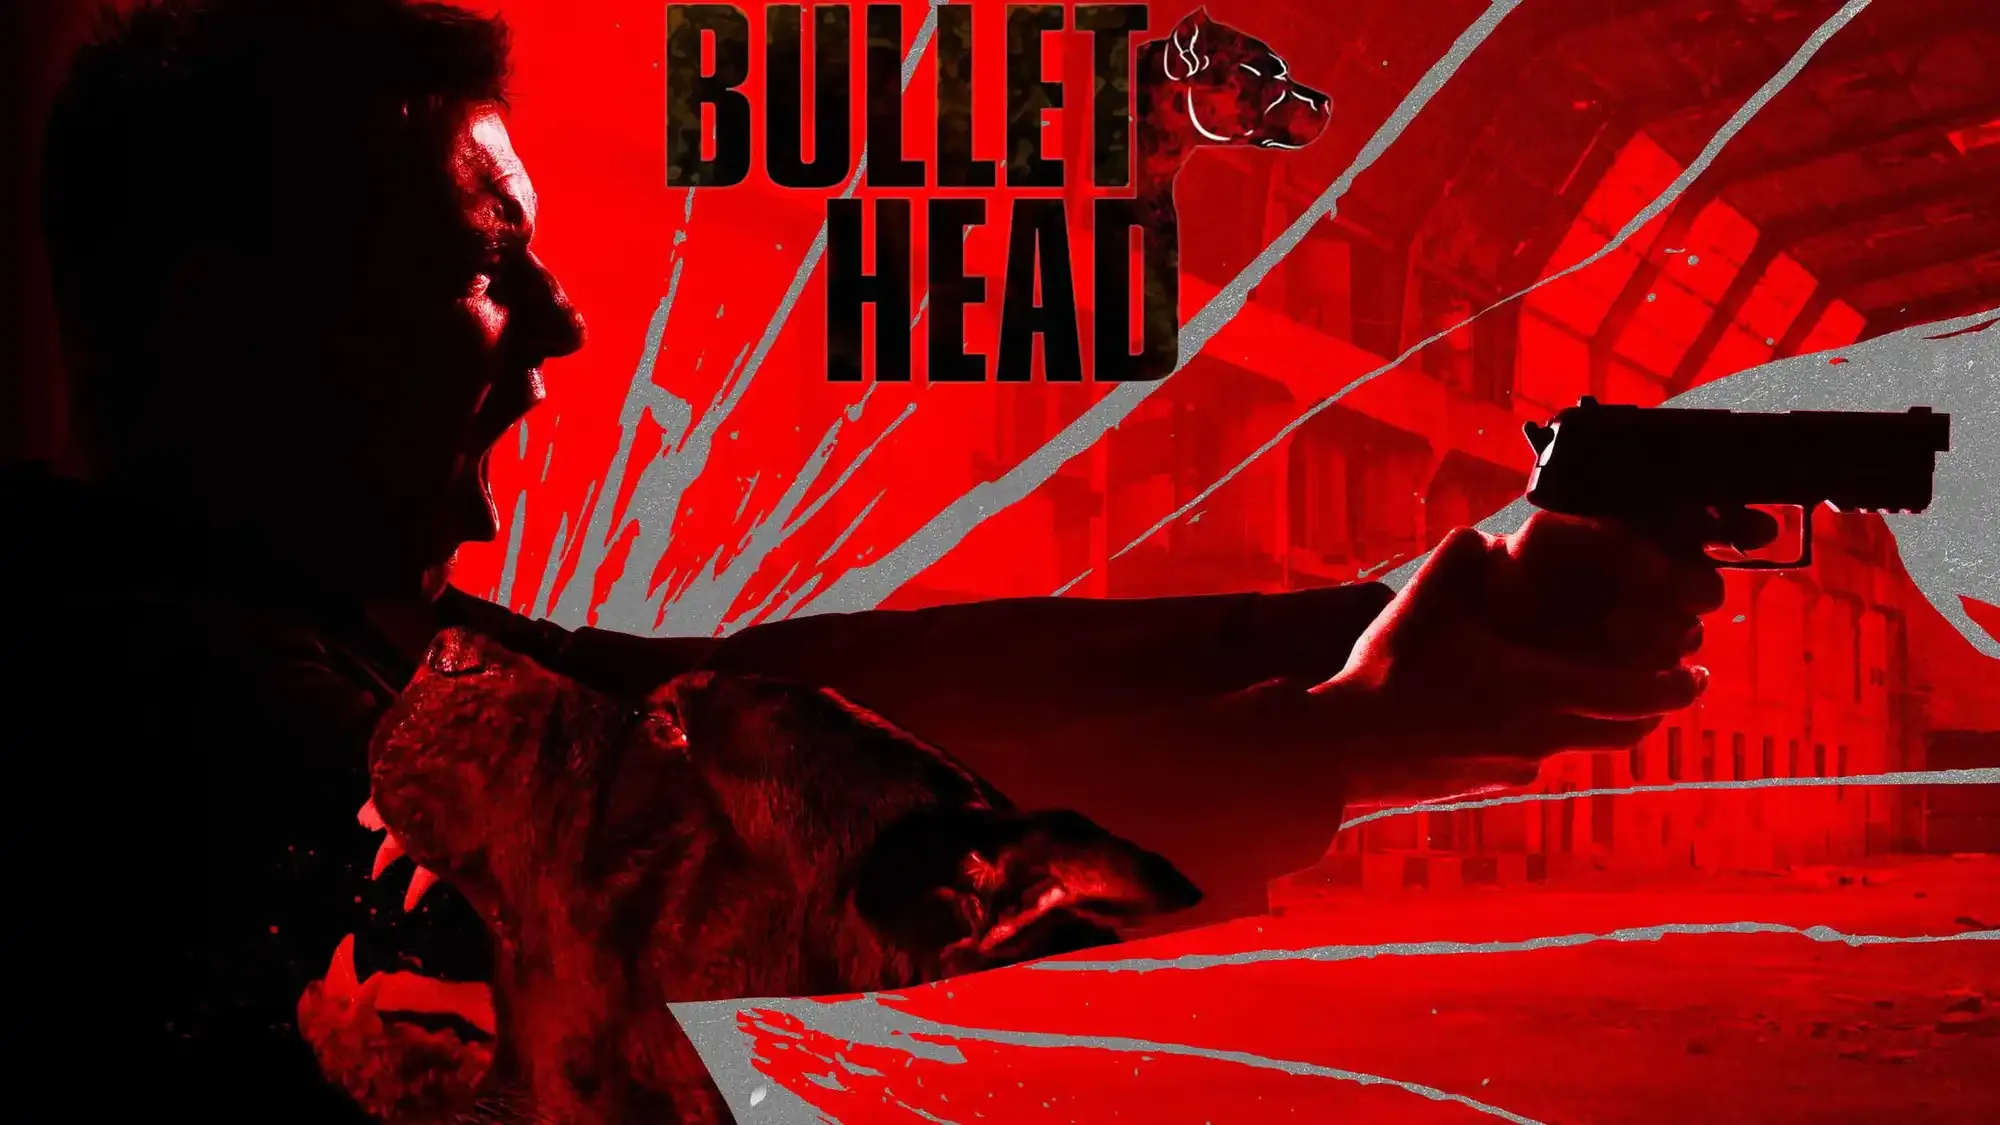 Bullet Head movie review